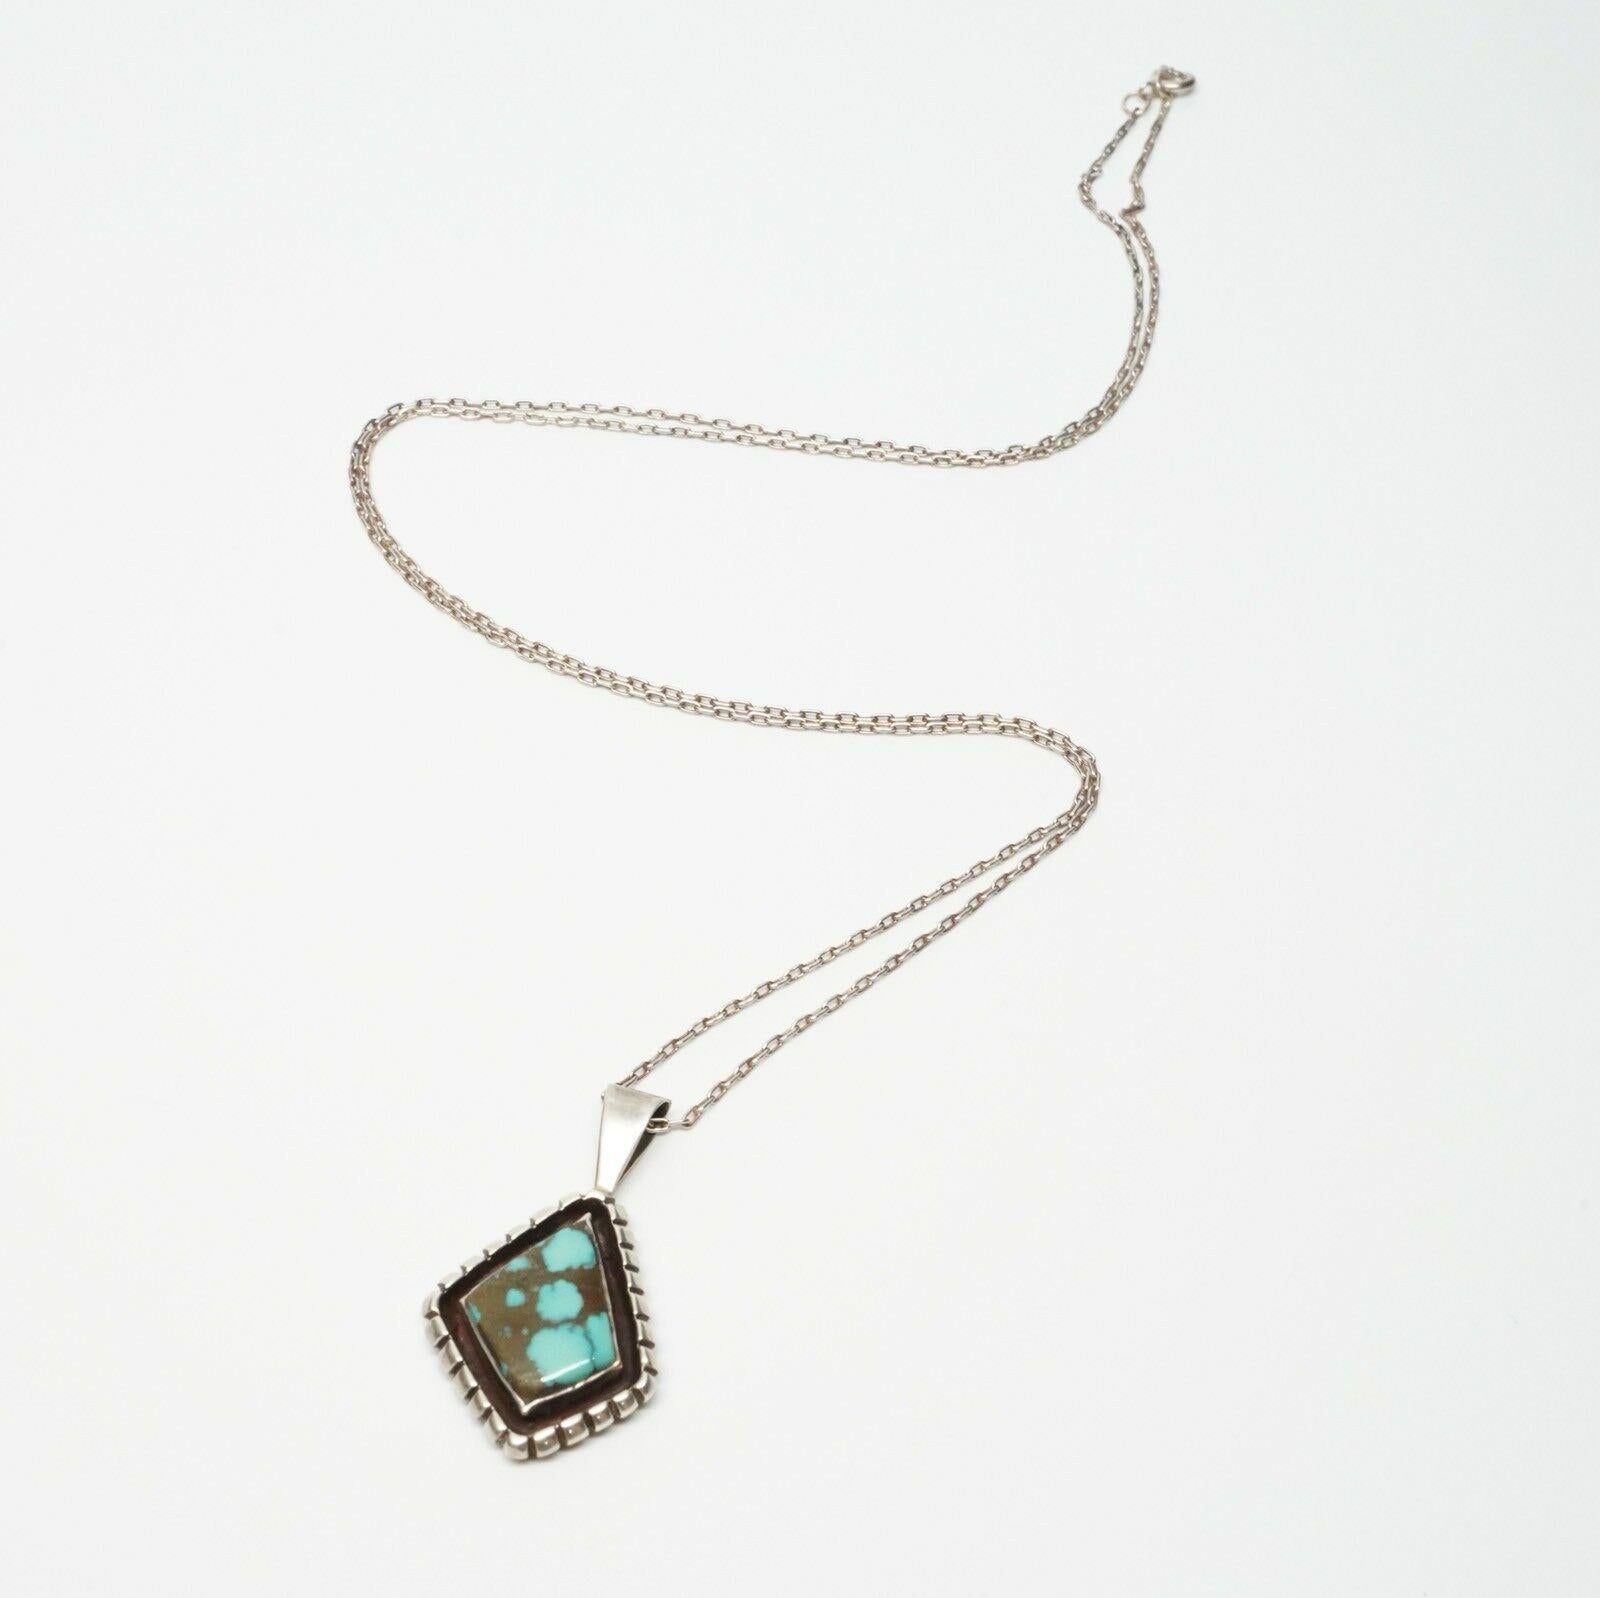 Navajo Native American Pendant Necklace by Eugene Belone

Stone rich with dark greens and turquoise colors.

Marked: Sterling Signed: EB

Measurements: 24